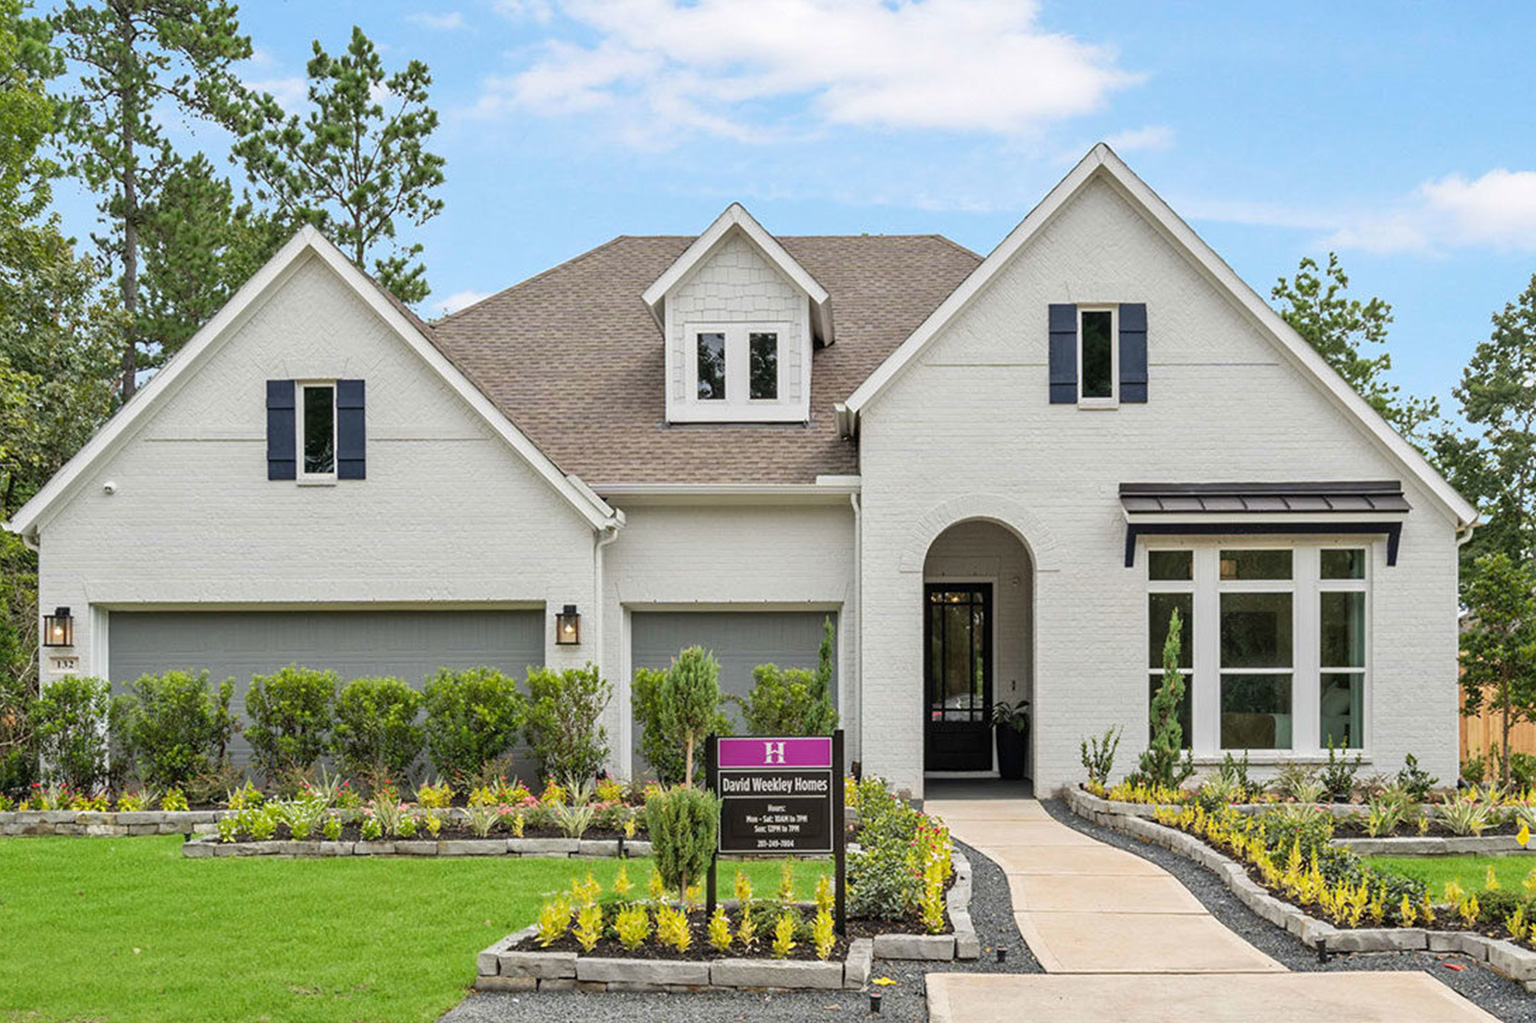 The Woodlands Hills Offers Variety of Home Selections and Community Events in a Natural Setting